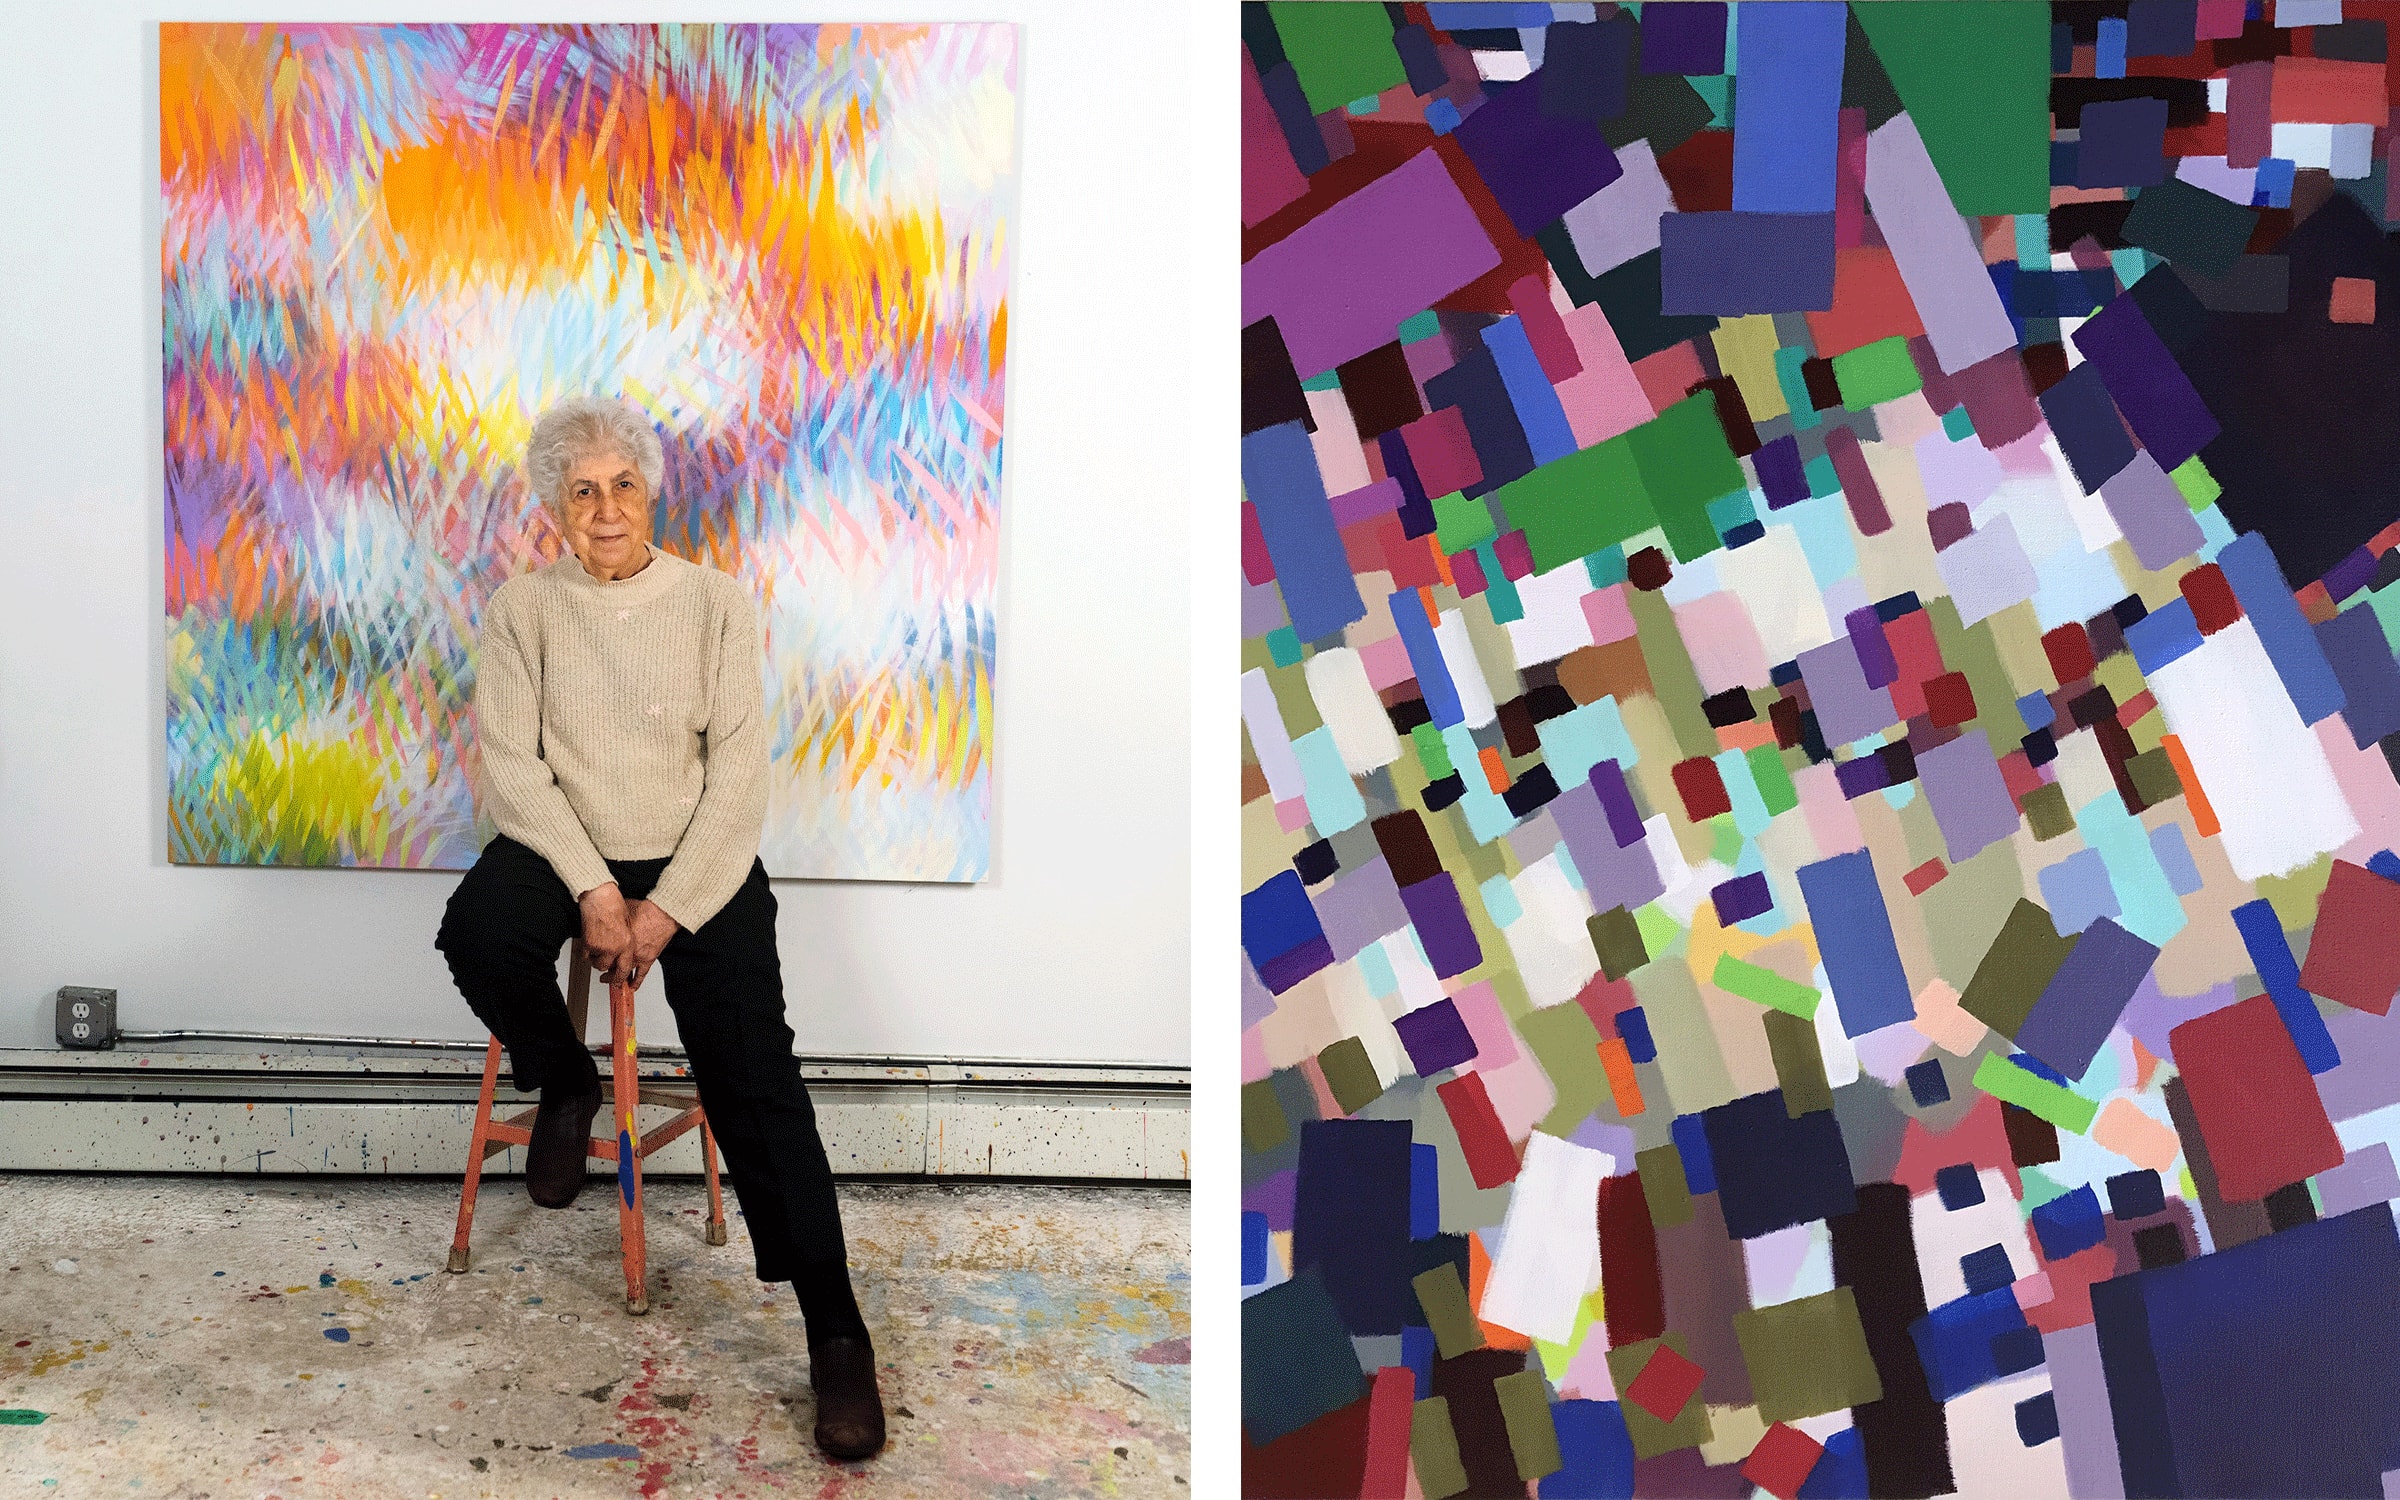 Left: Samia Halaby, 2020. Courtesy of the artist and Sfeir-Semler Gallery. Right: Samia Halaby, Steps Shops Signs (detail), 2023. Courtesy of the artist and Sfeir-Semler Gallery.